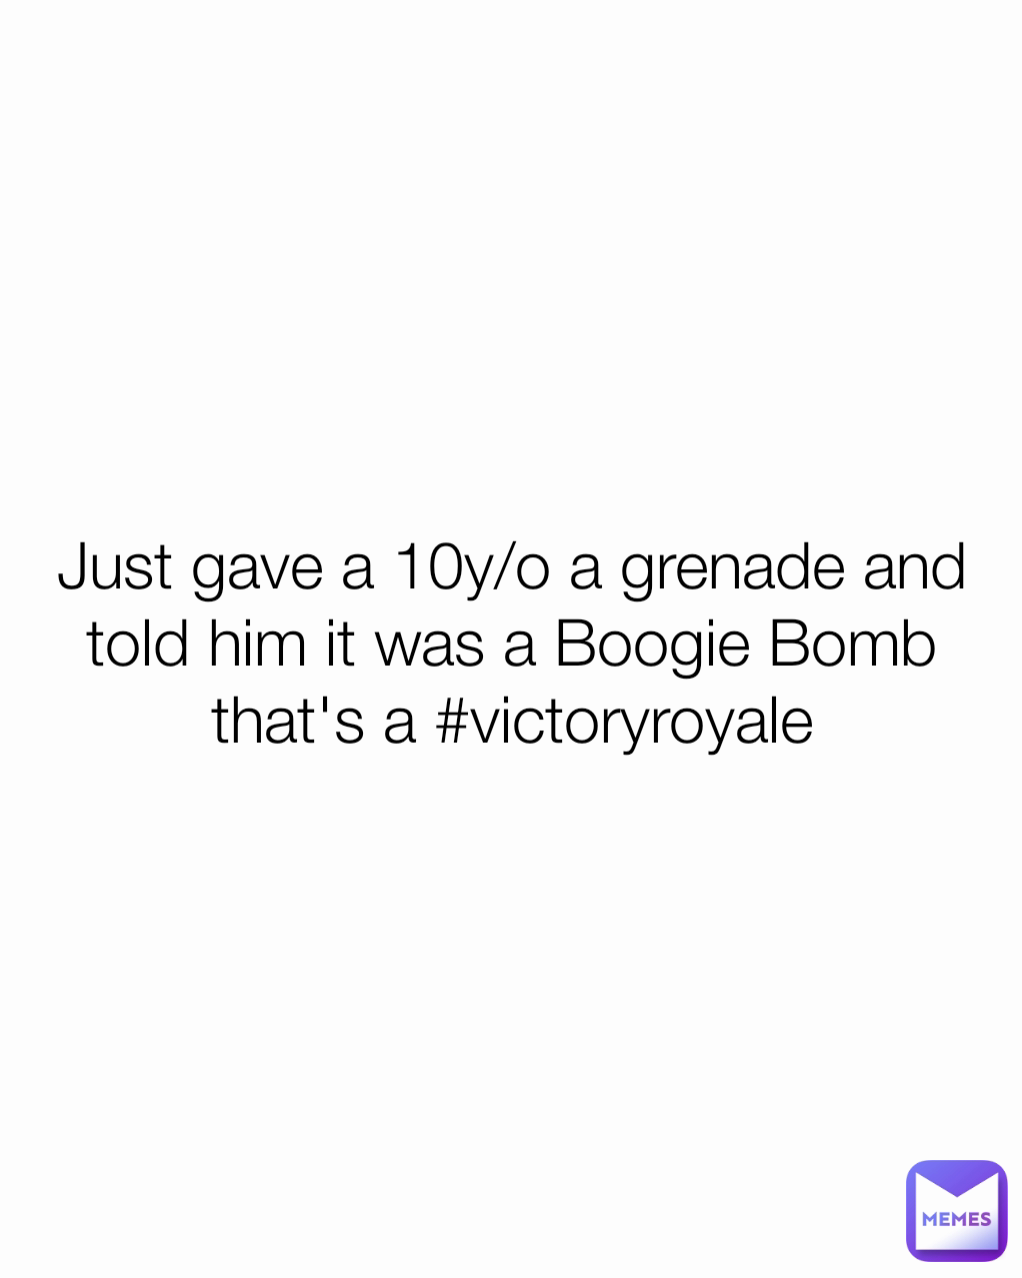 Just gave a 10y/o a grenade and told him it was a Boogie Bomb that's a #victoryroyale